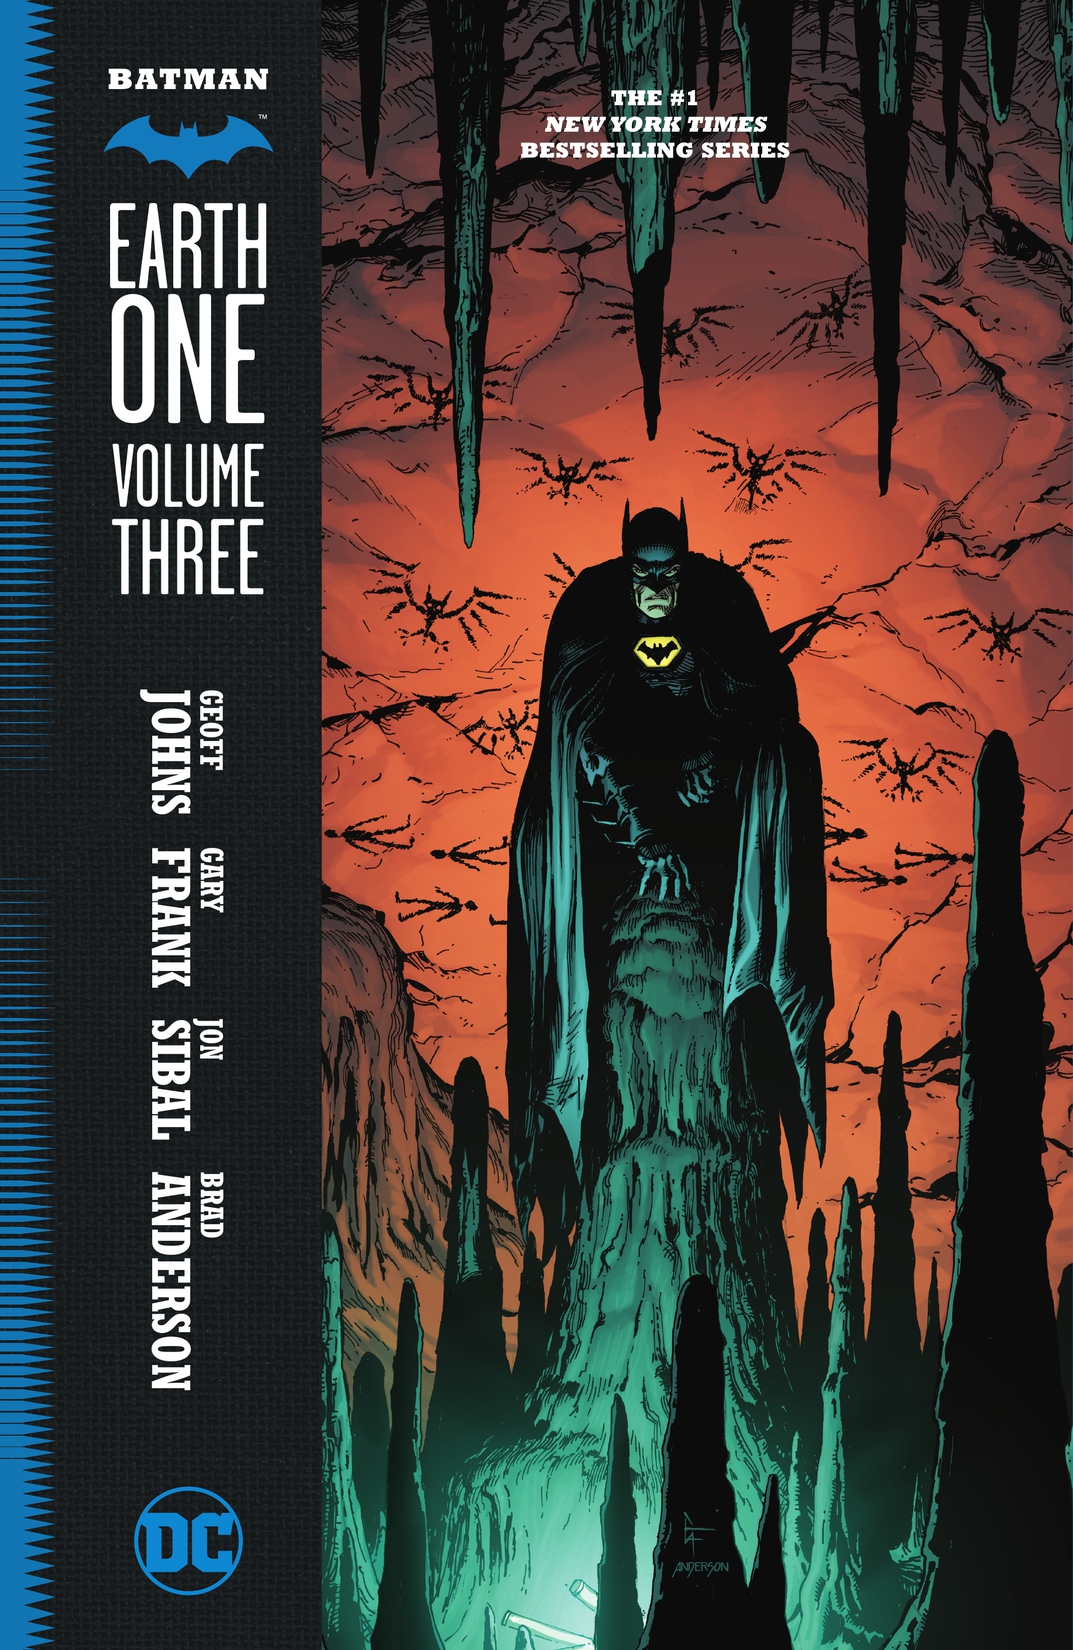 Batman: Earth One Vol. 3 preview images